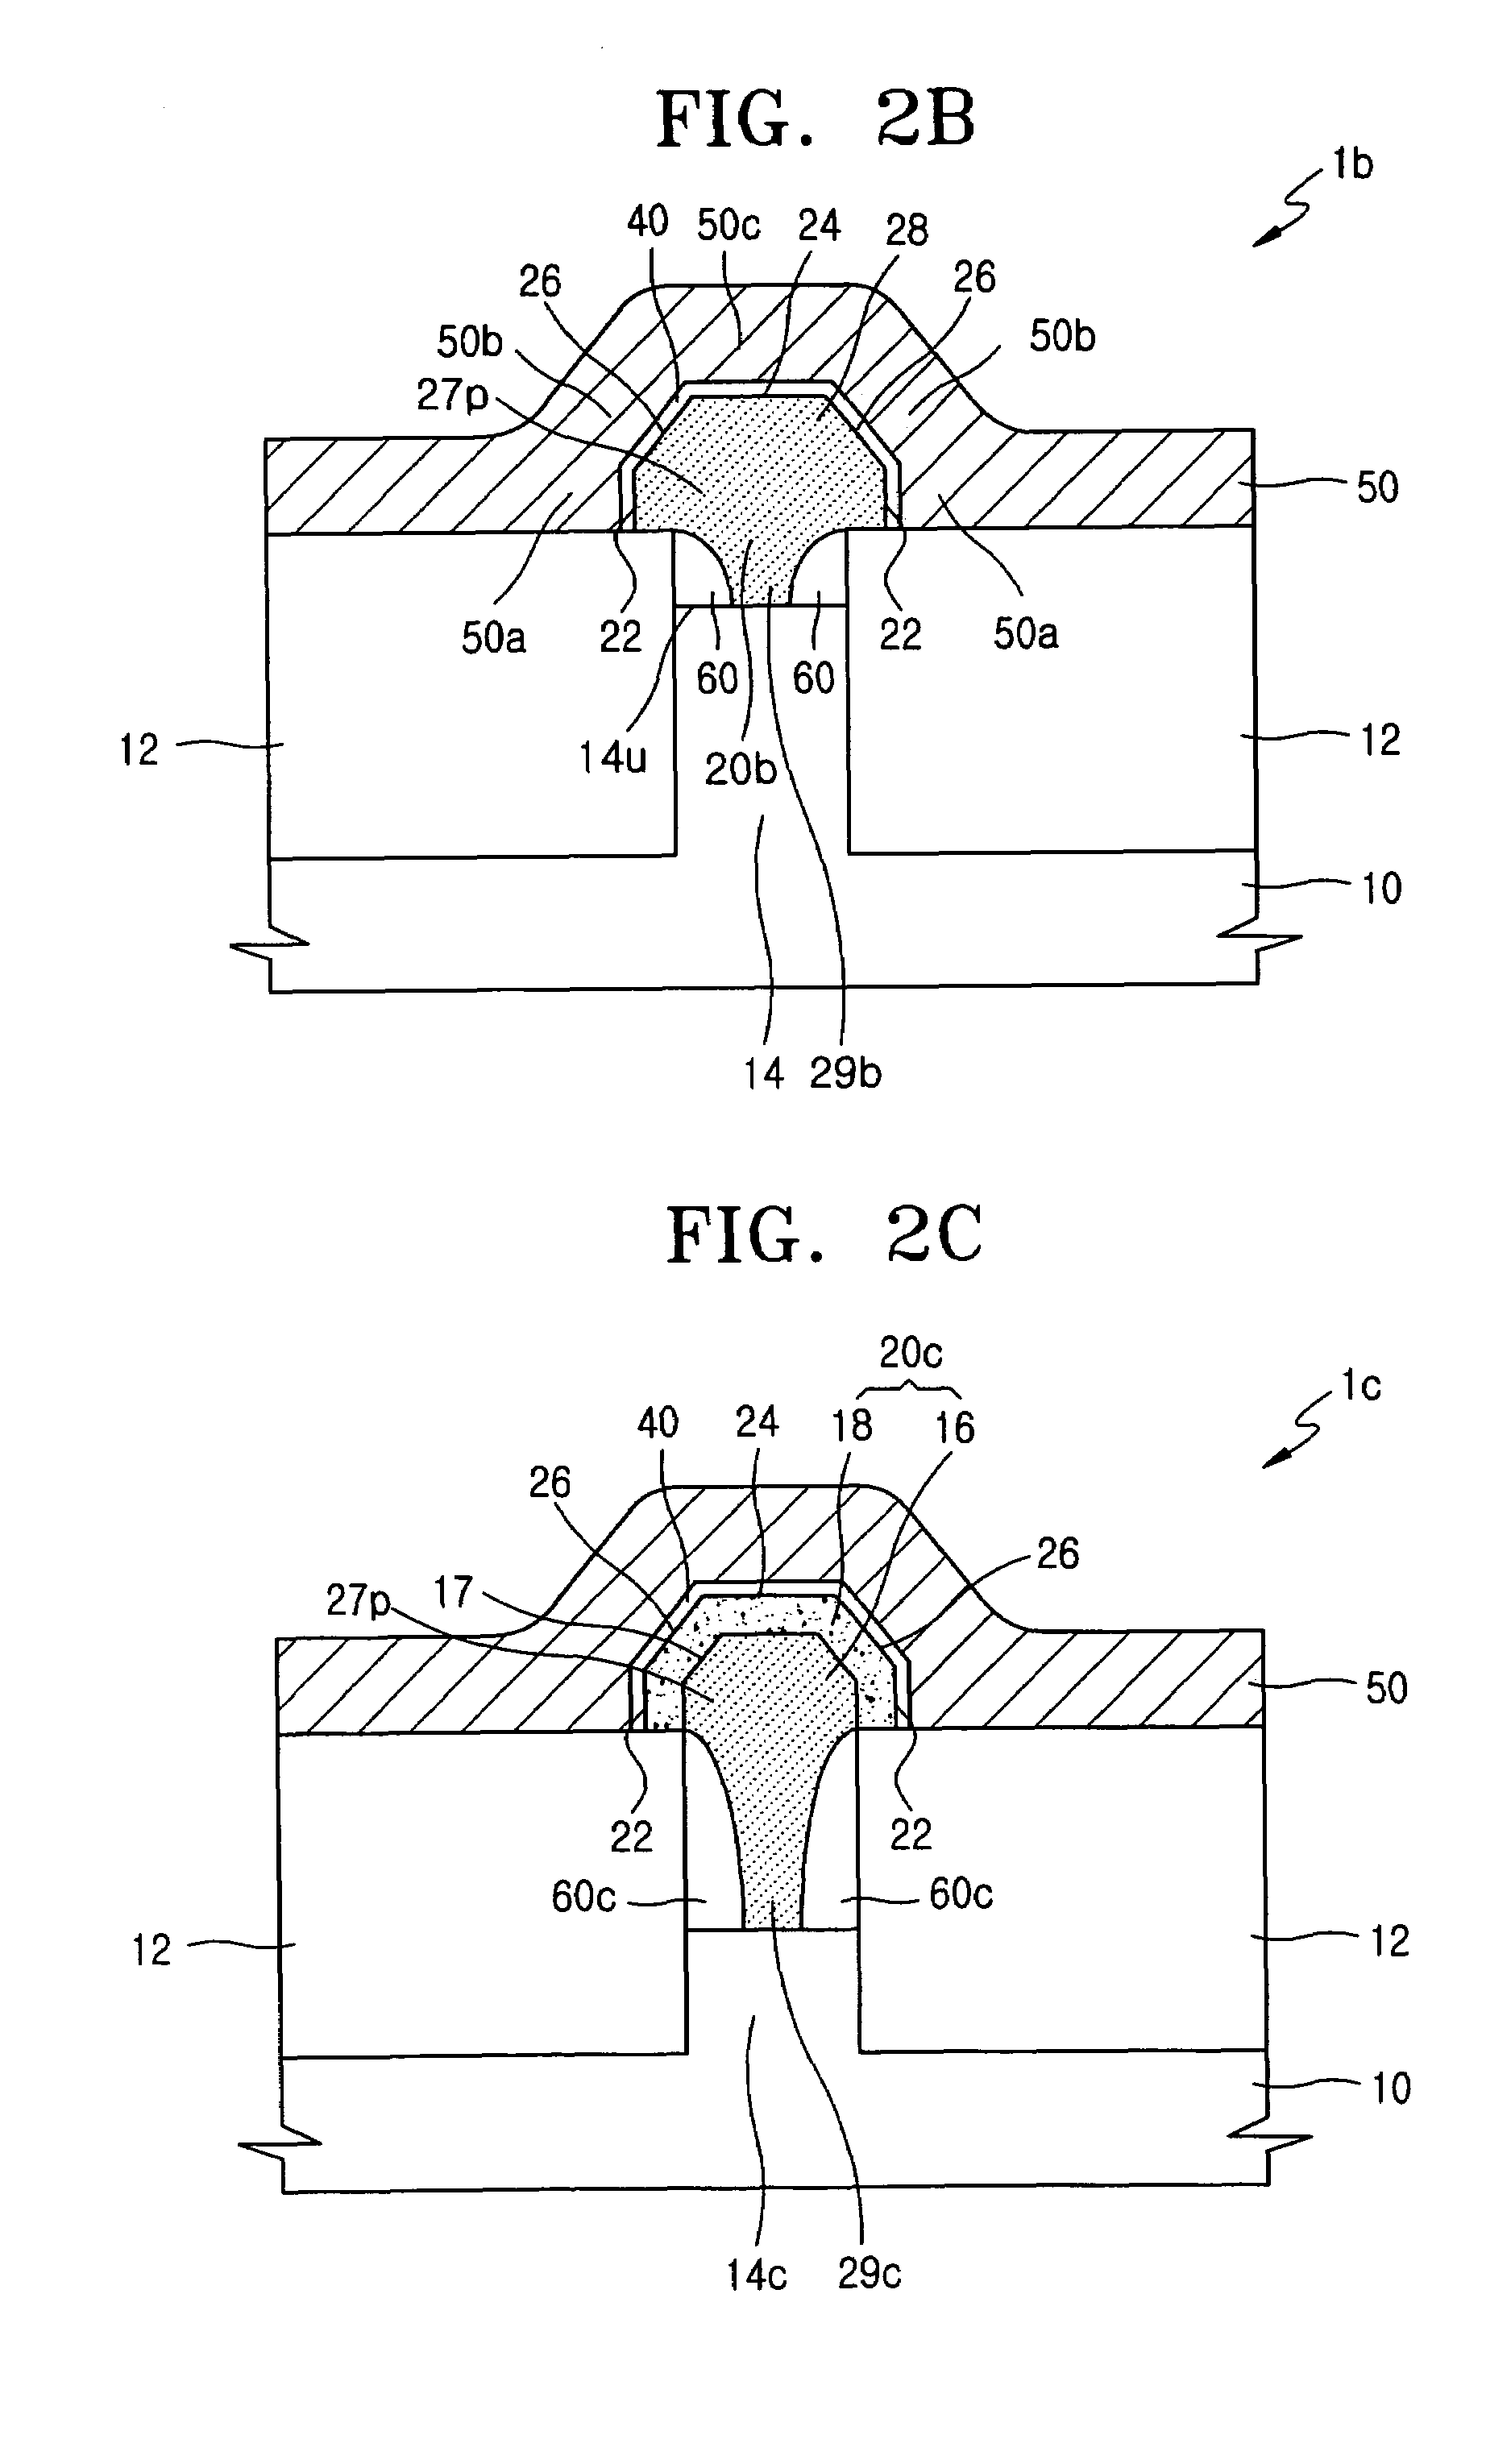 At least penta-sided-channel type of FinFET transistor